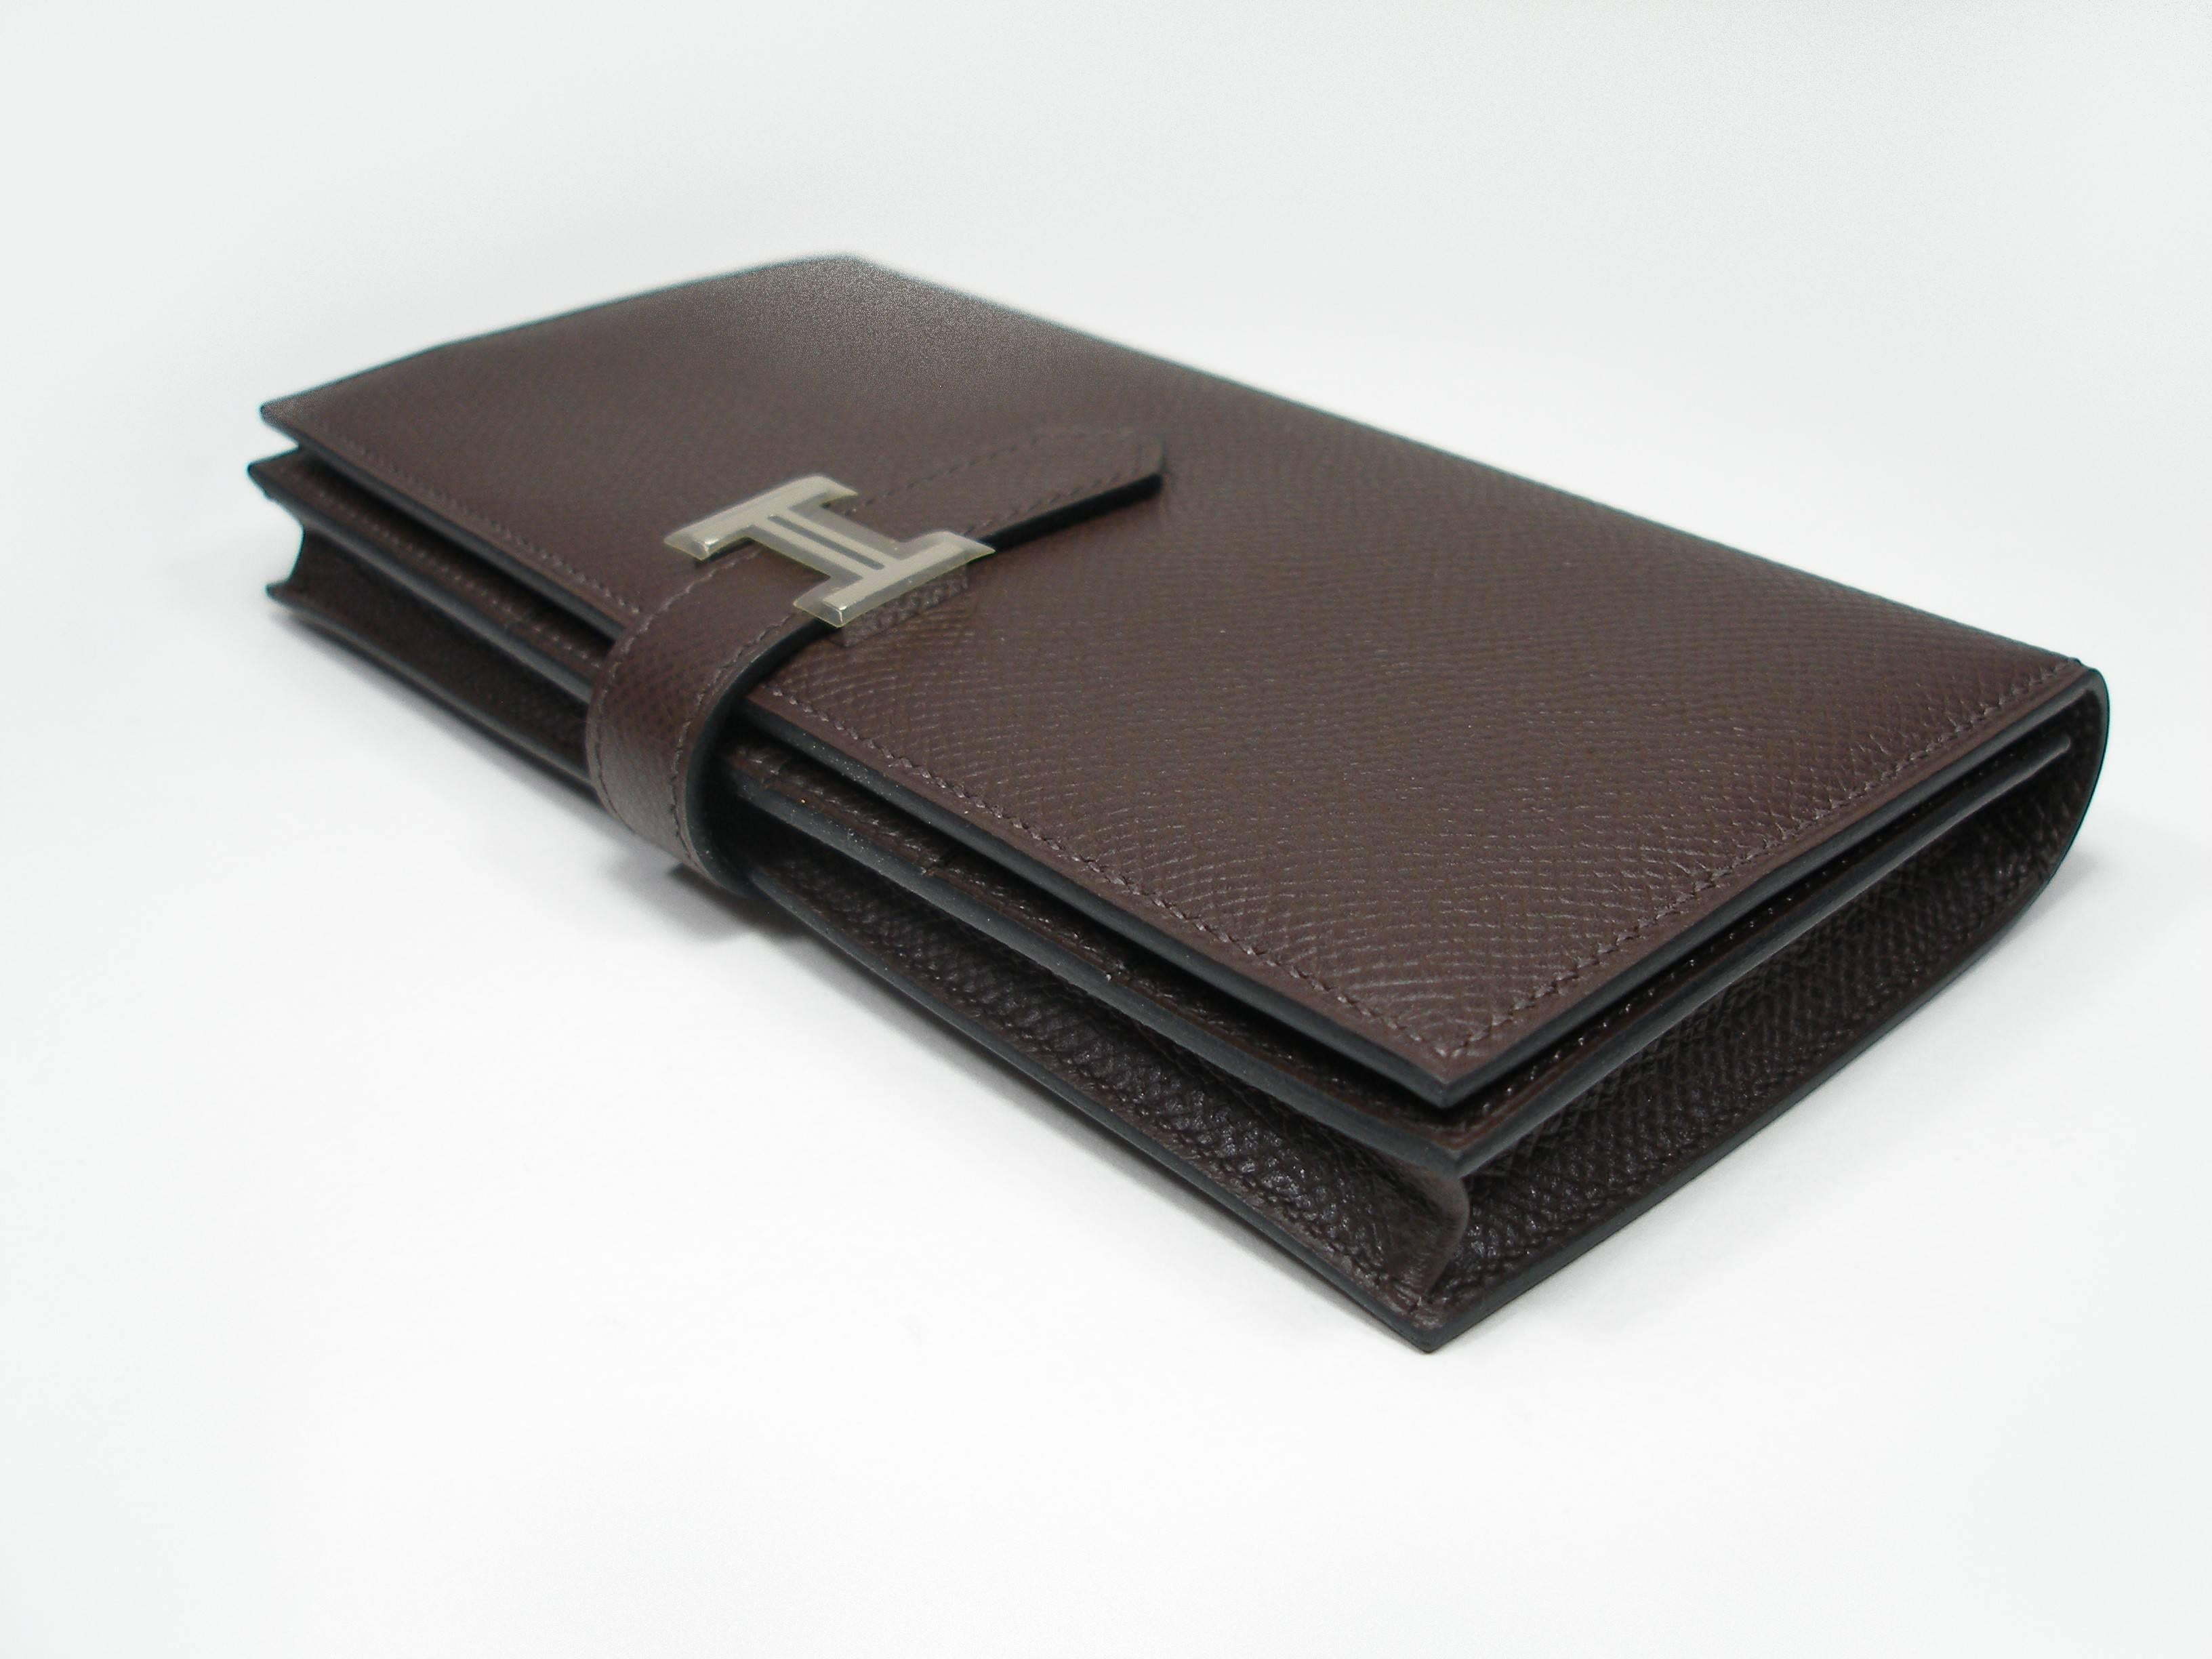 Absoluty Brand New 
Never worn / used
Hermès Béarn Soufflet Wallet
Epsom Leather : Nice color Chocolat / brown
Stamped Hermès Made in France
H claps Palladium
Stamp O in square , year 2011
Measures 6.9